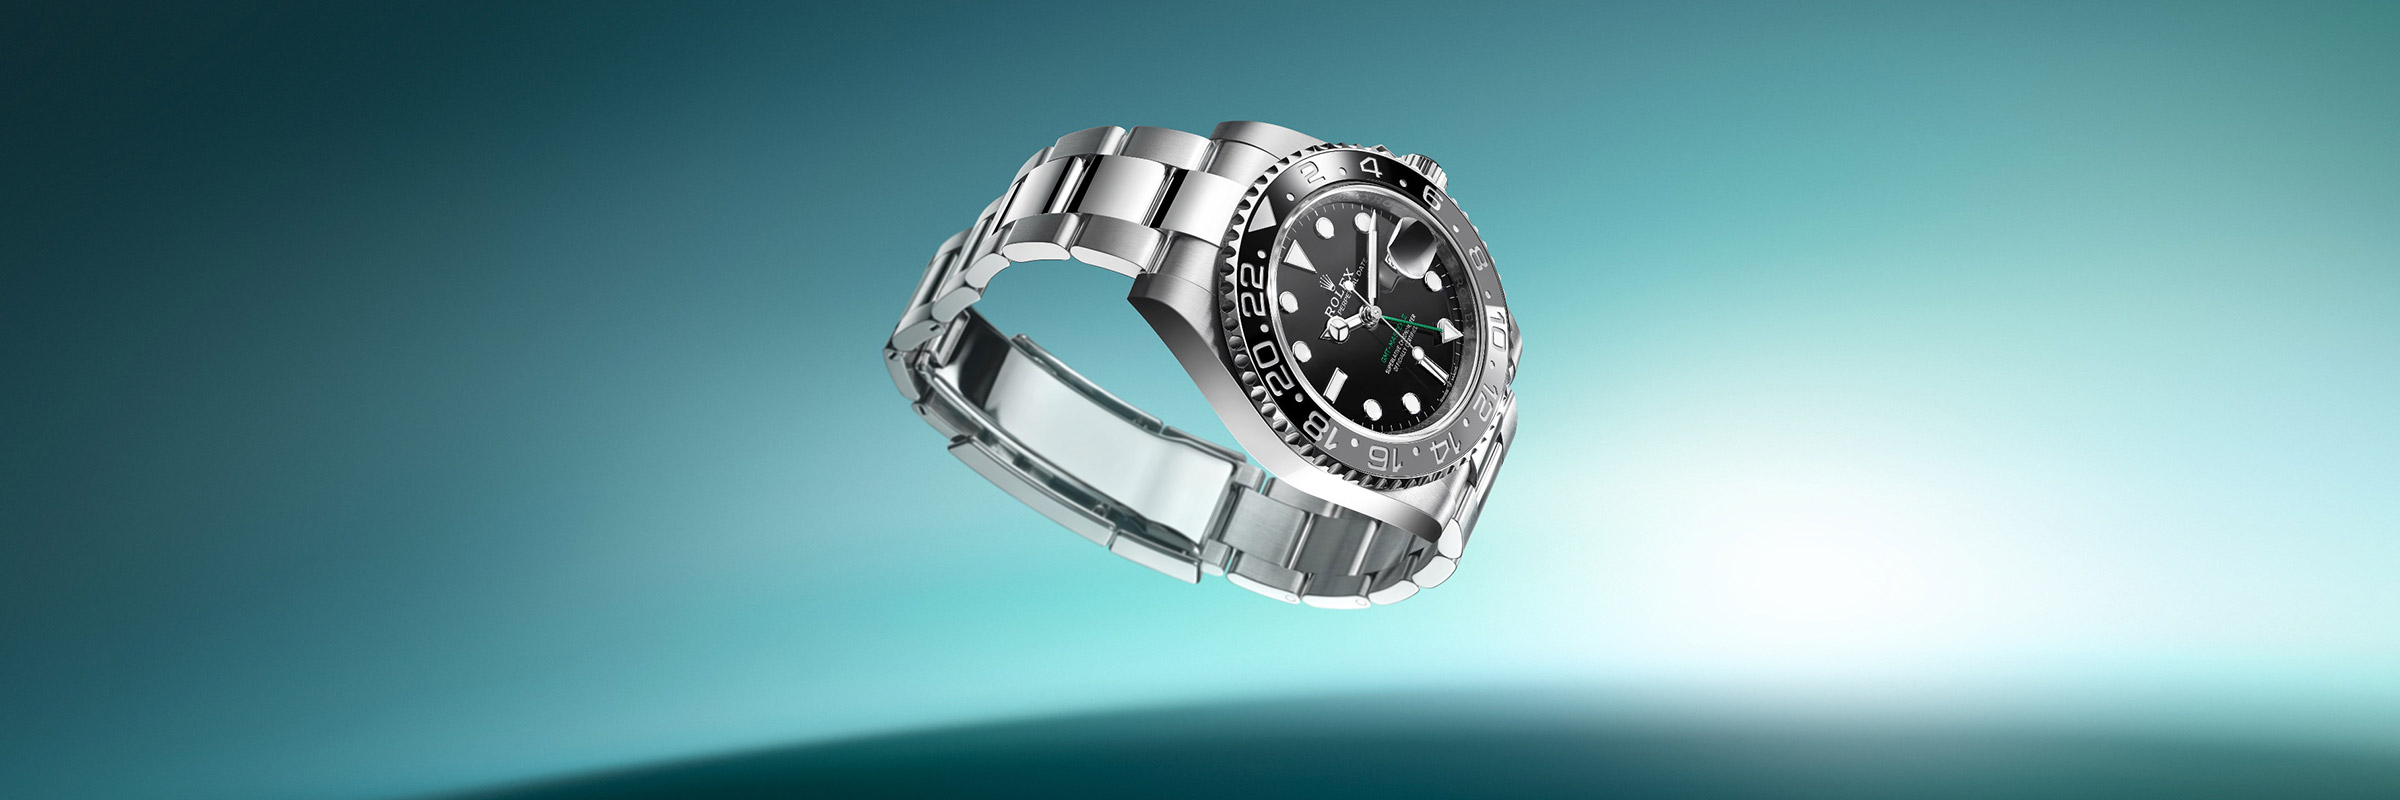 rolex watches in canada - global watch company